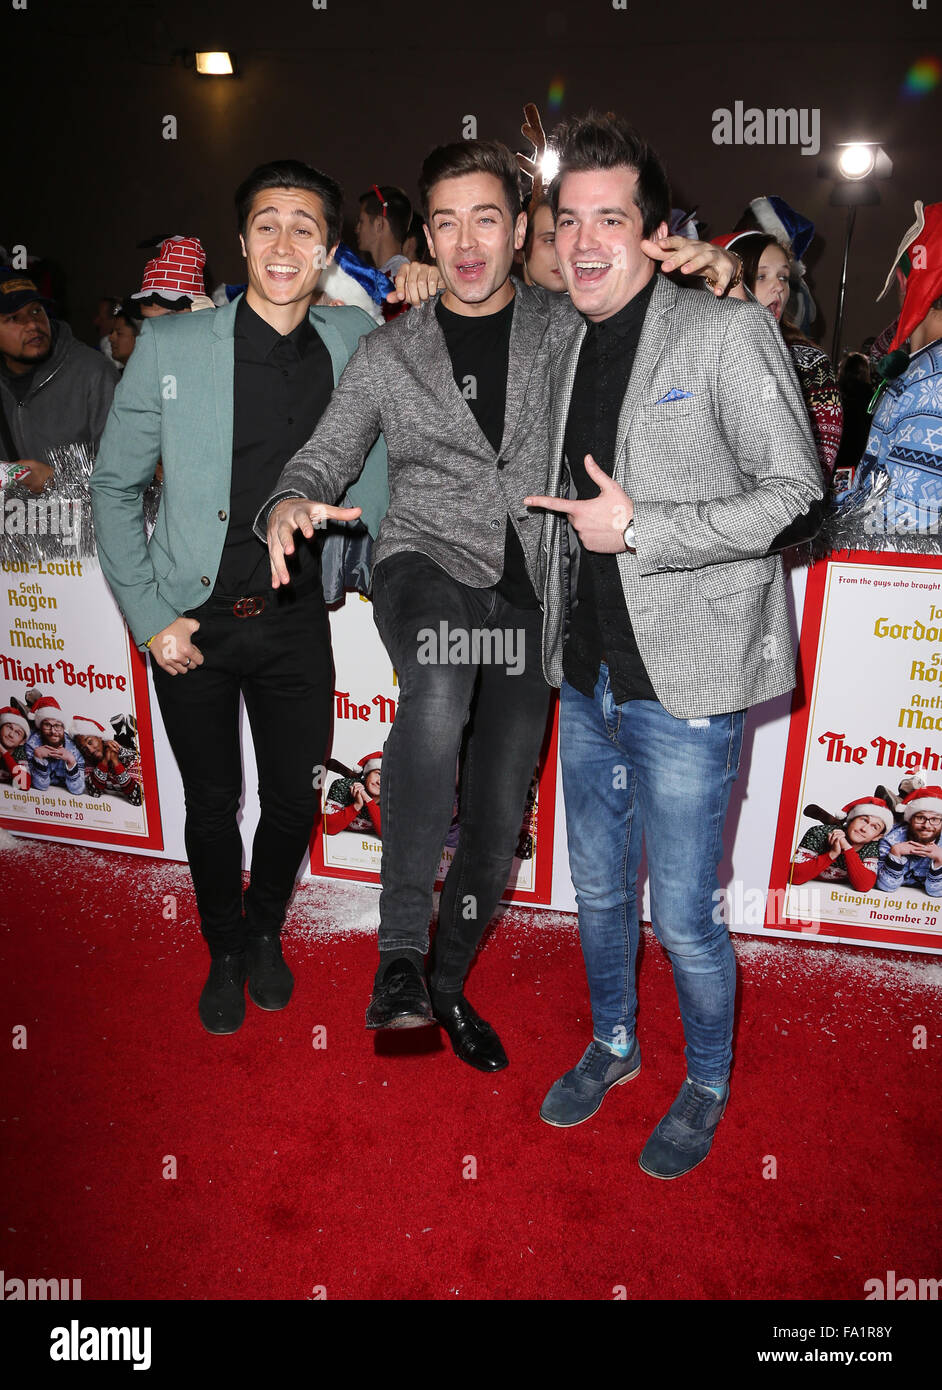 Los Angeles premiere of 'The Night Before' at the ACE Hotel - Arrivals  Featuring: Aleksey Lopez, Kristopher James, Kyle Carpenter of the boy band The Scheme Where: Los Angeles, California, United States When: 18 Nov 2015 Stock Photo